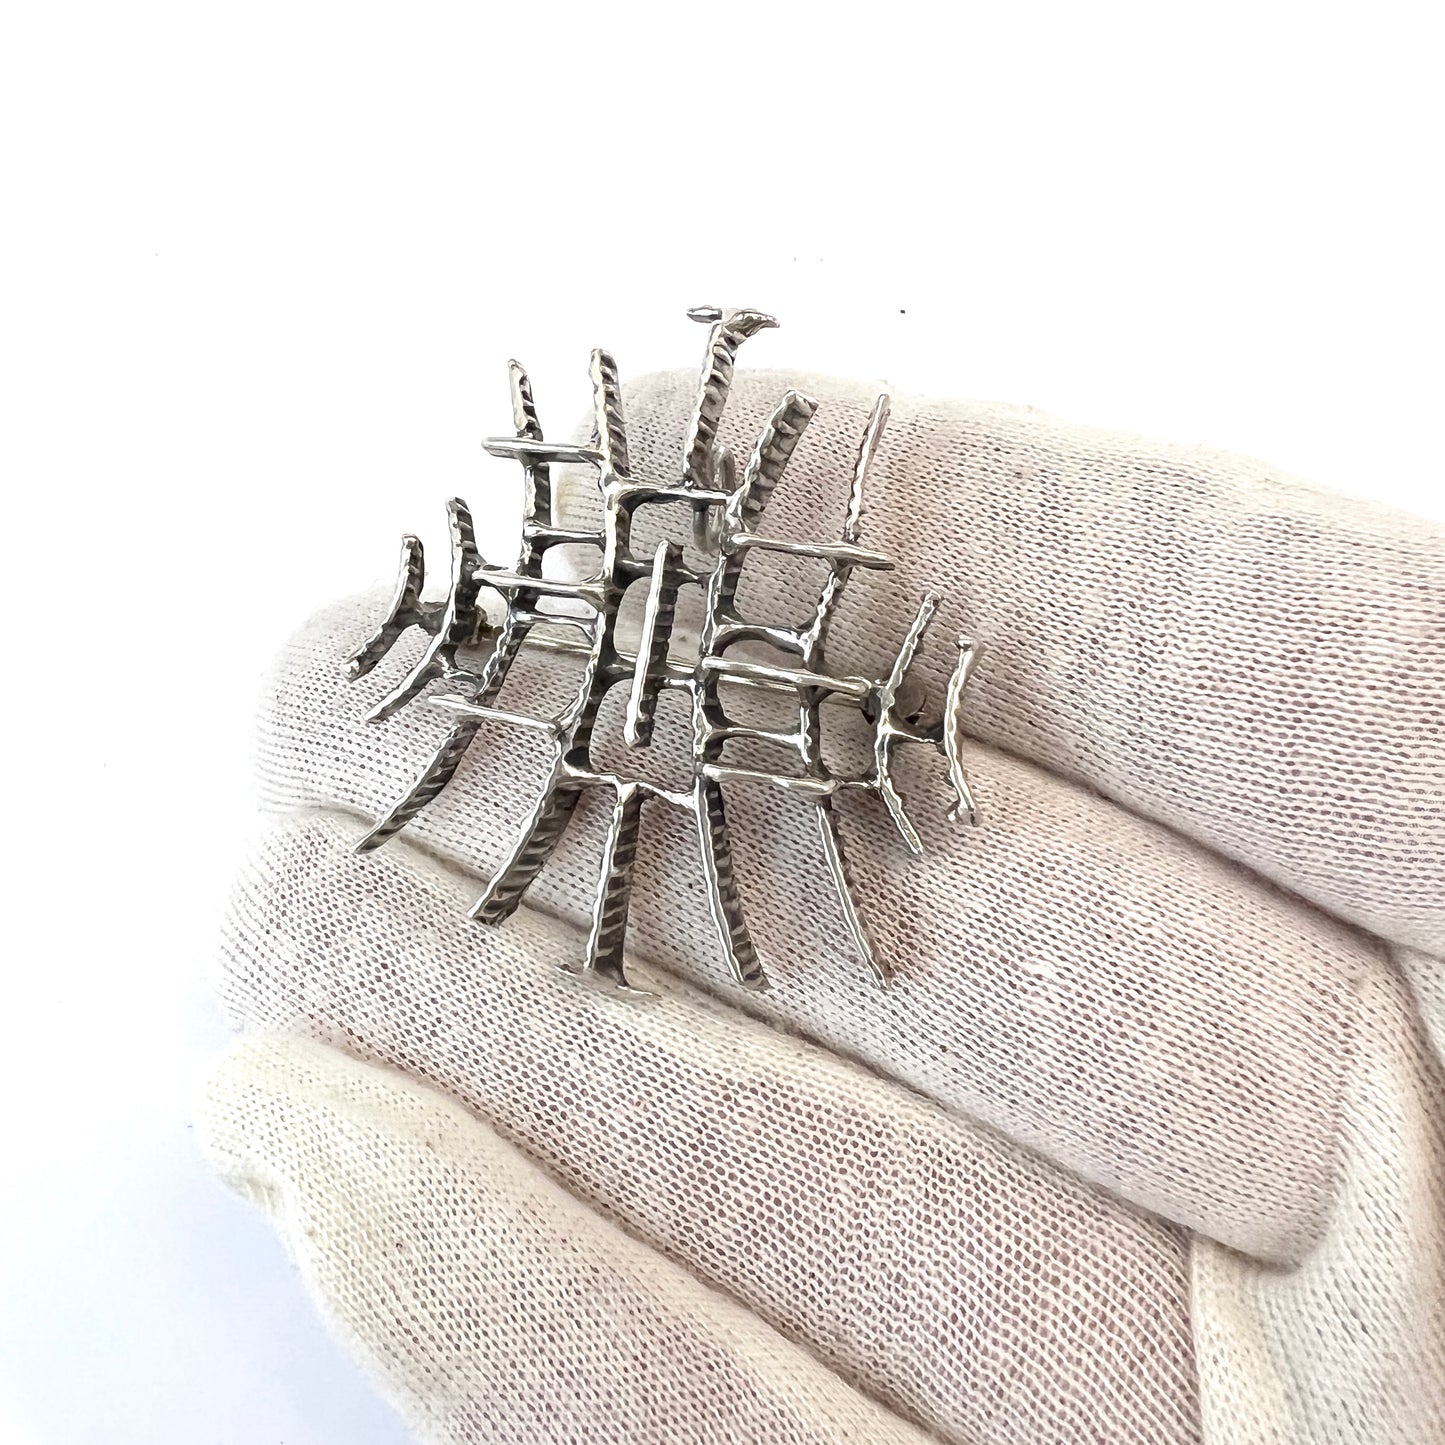 Else and Paul, Norway 1960s Modernist Sterling Silver Brooch Pendant.